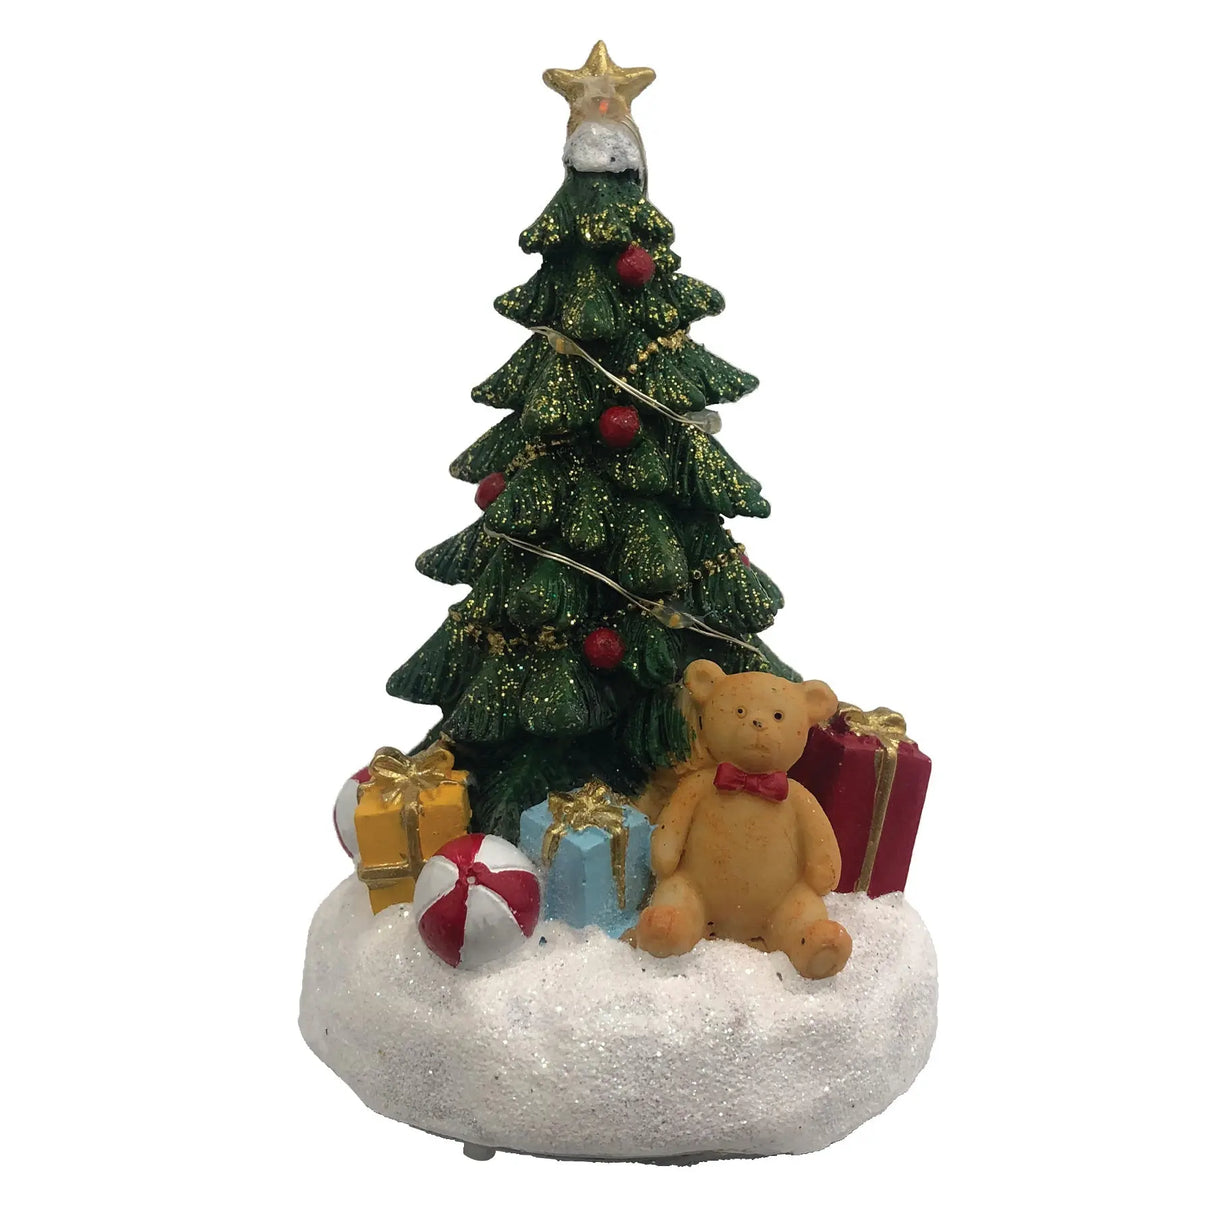 Light up Tree with Teddy Bear fgsquarevillage